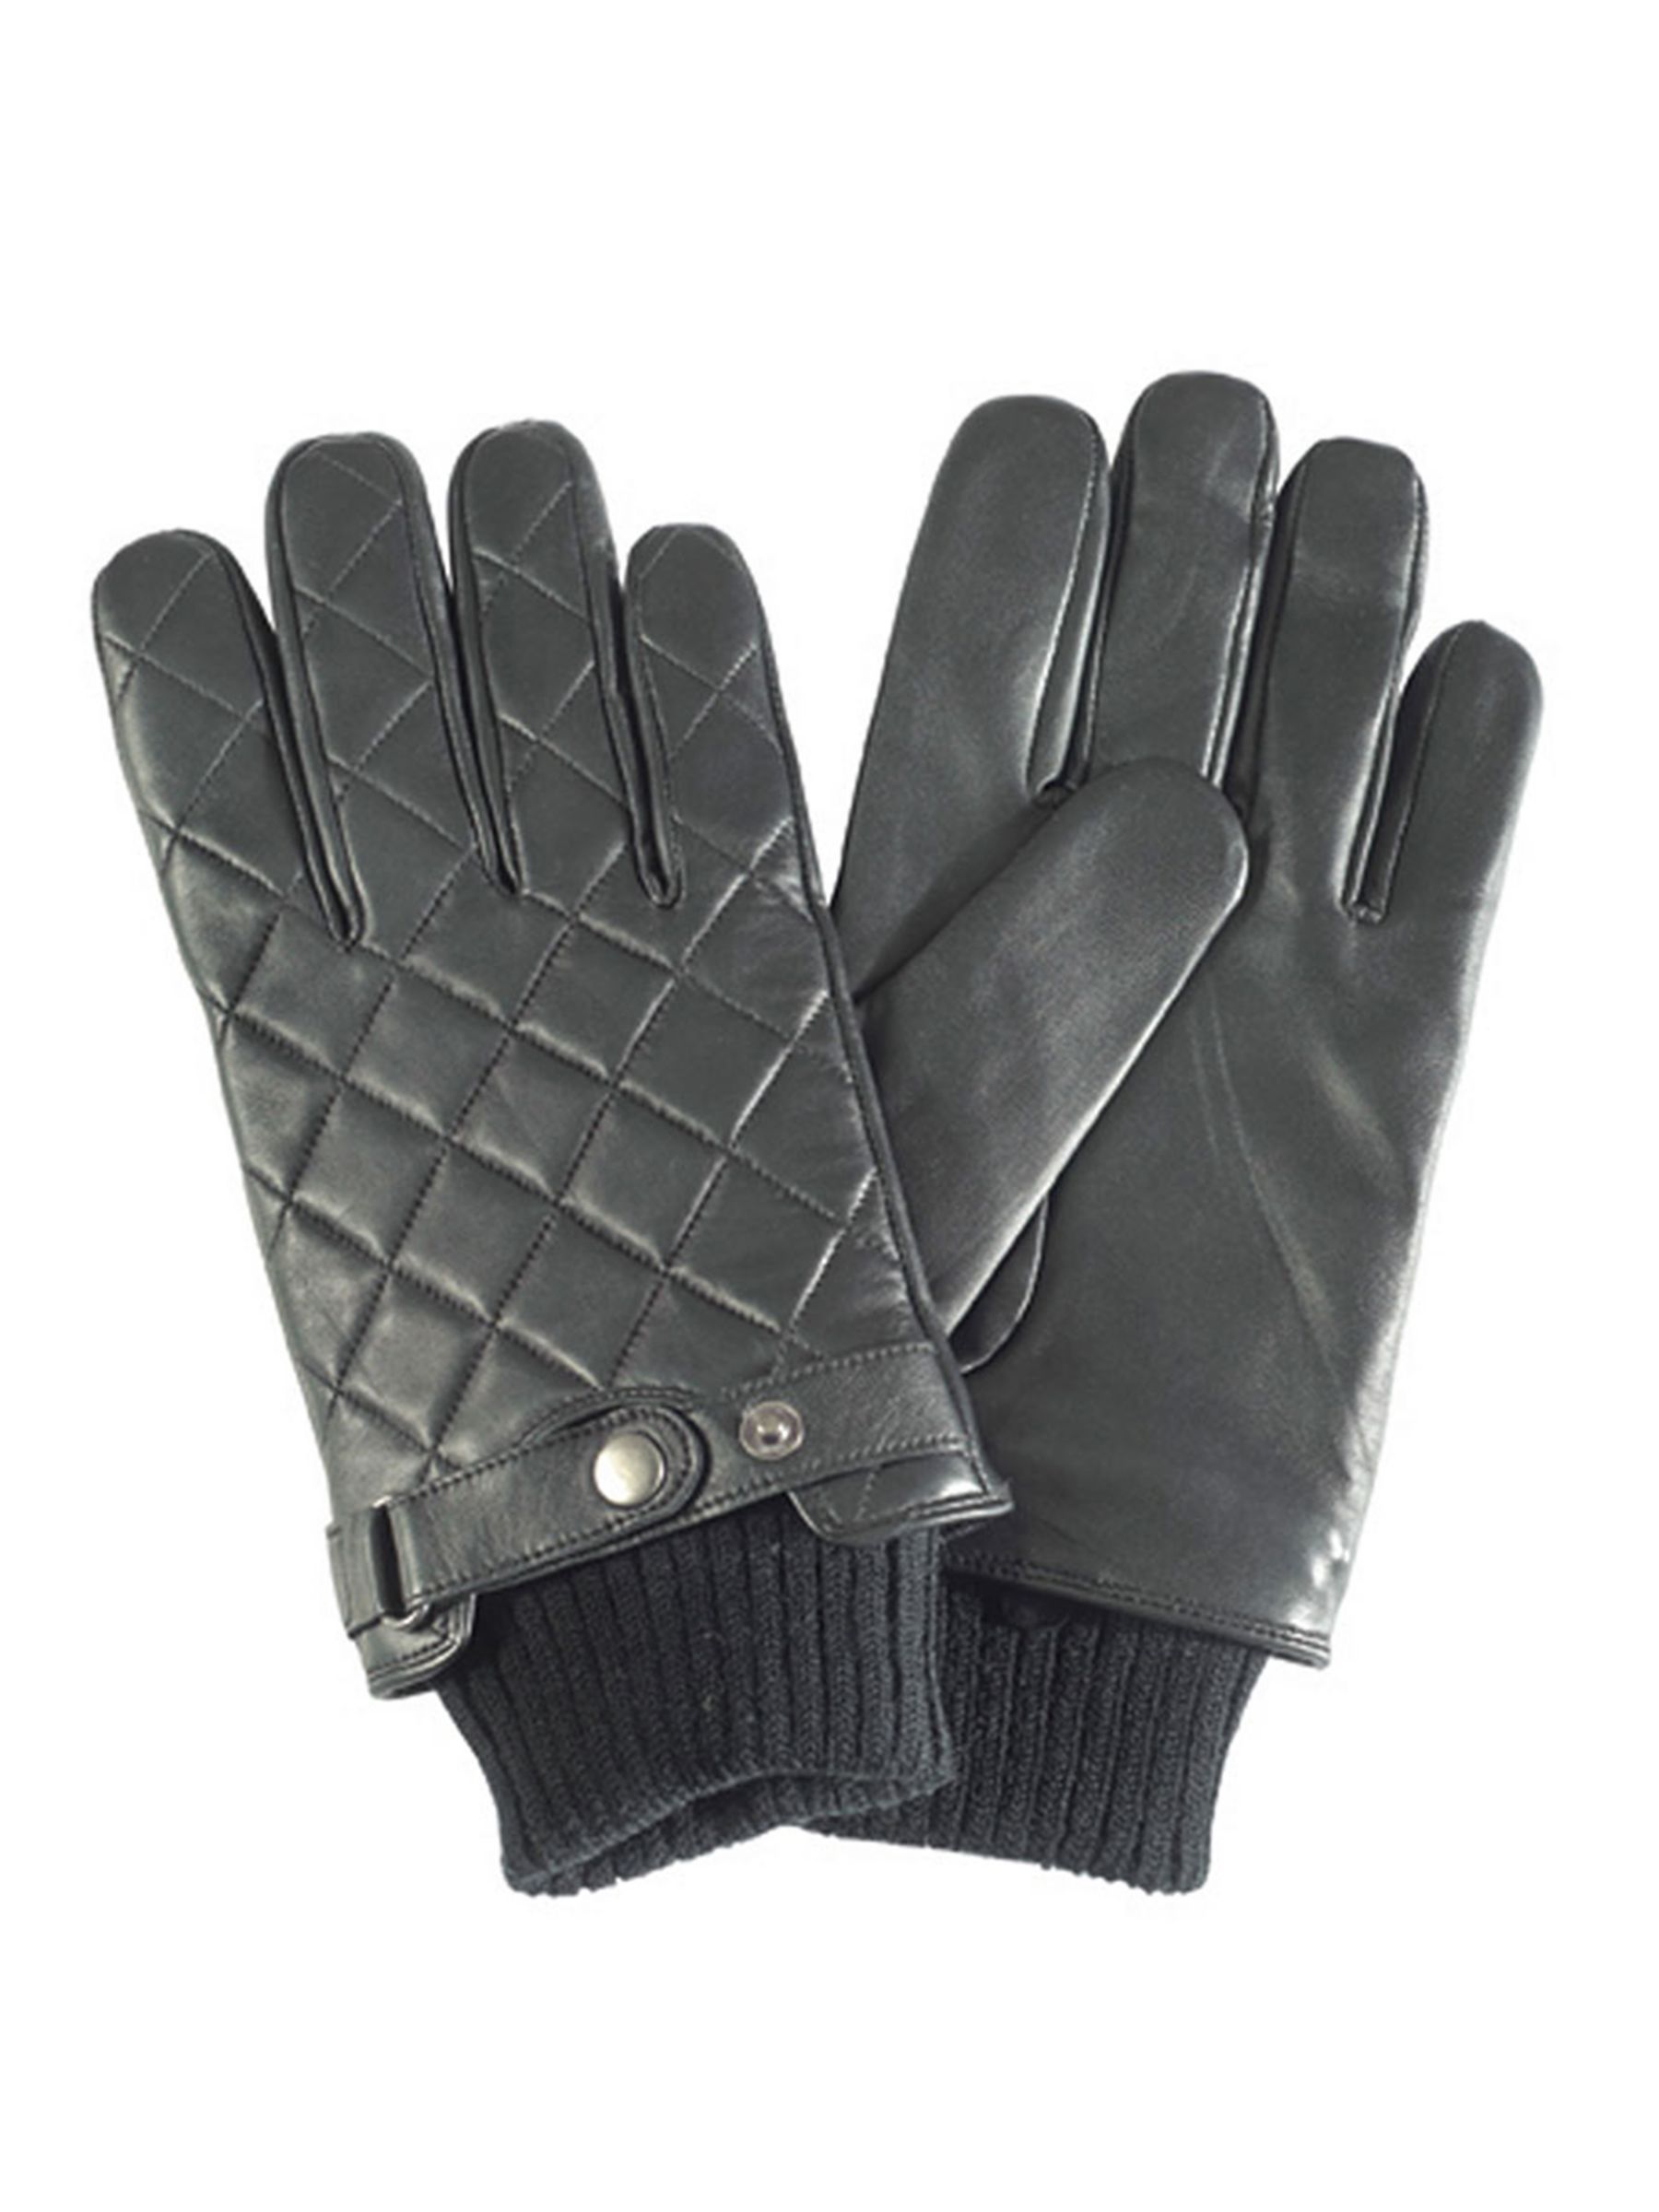 Barbour Quilted Leather Gloves, Black, XL